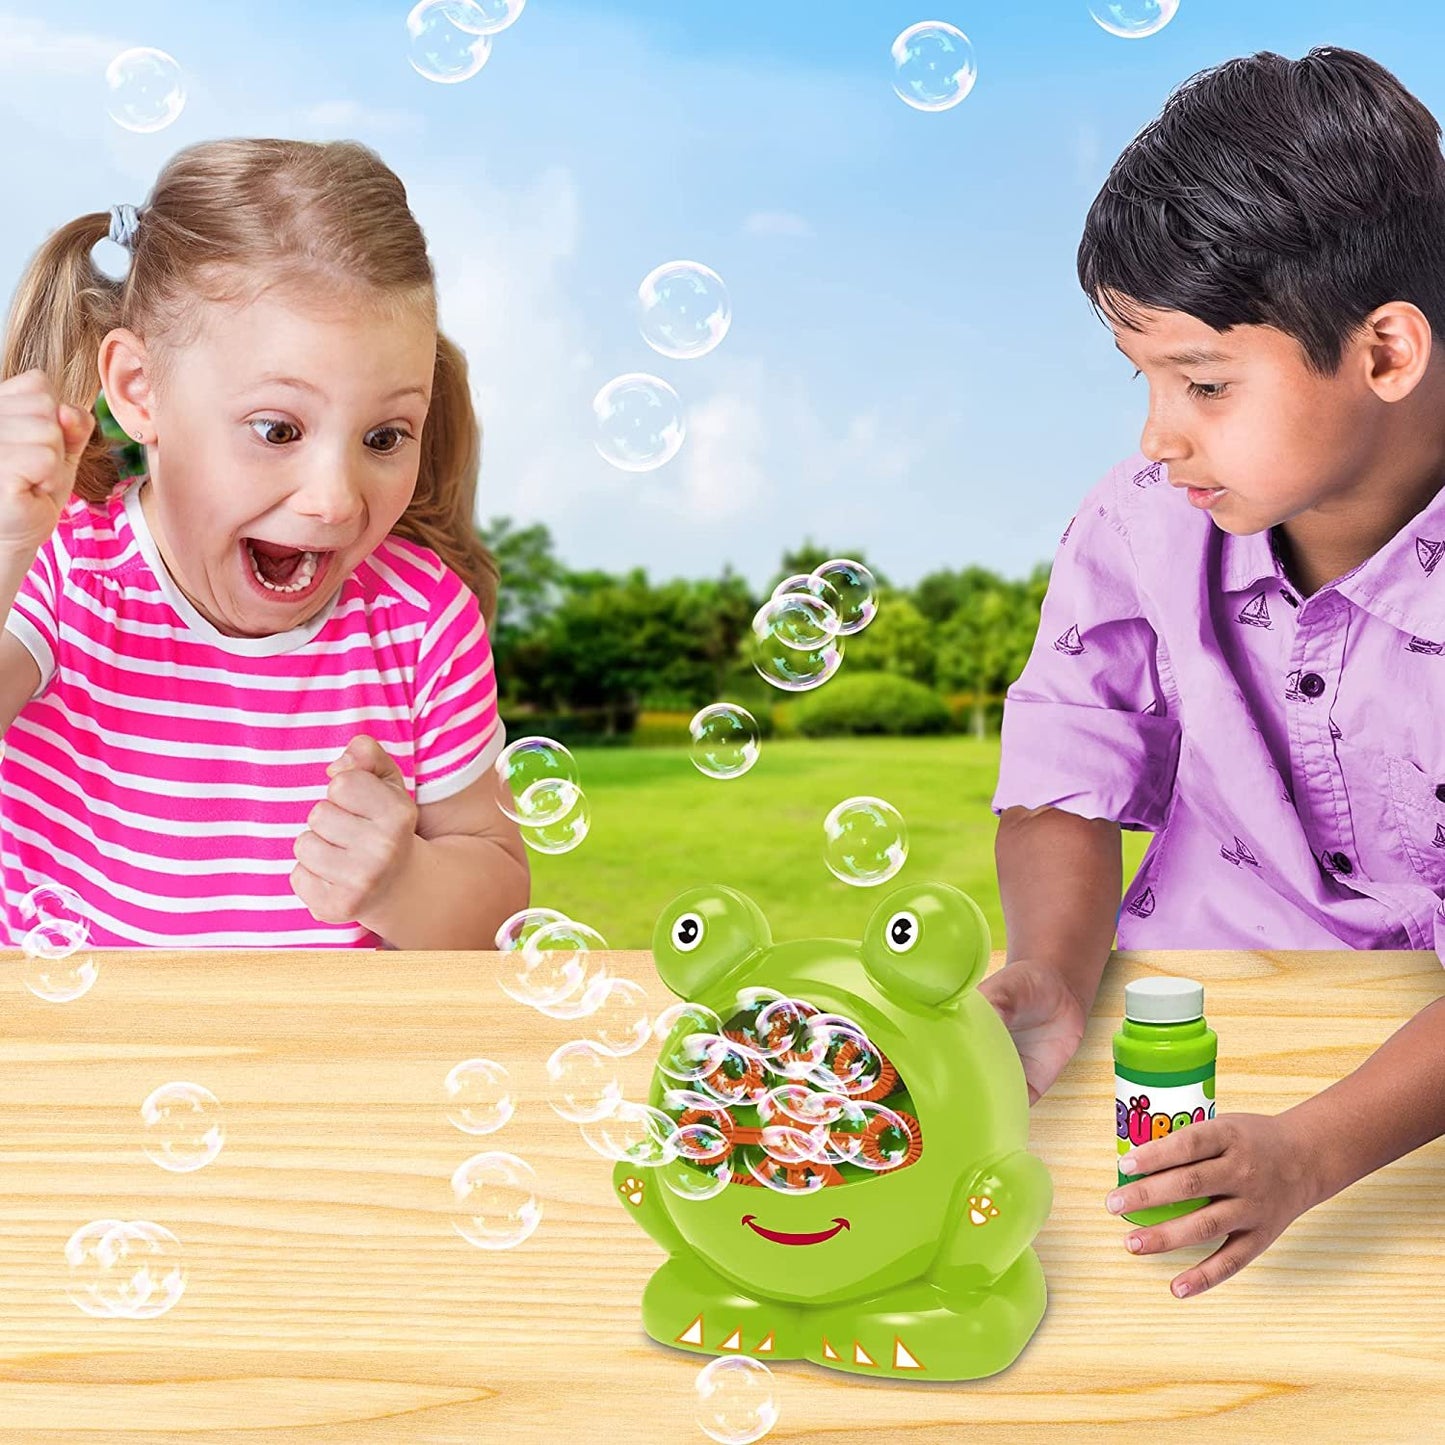 ArtCreativity Frog Bubble Machine Set for Kids - 2 Pack - Includes 2 Bubbles Blowing Toys and 2 Bottles of Solution - Fun Summer Outdoor or Party Activity - Best Gift for Boys, Girls, and Toddlers